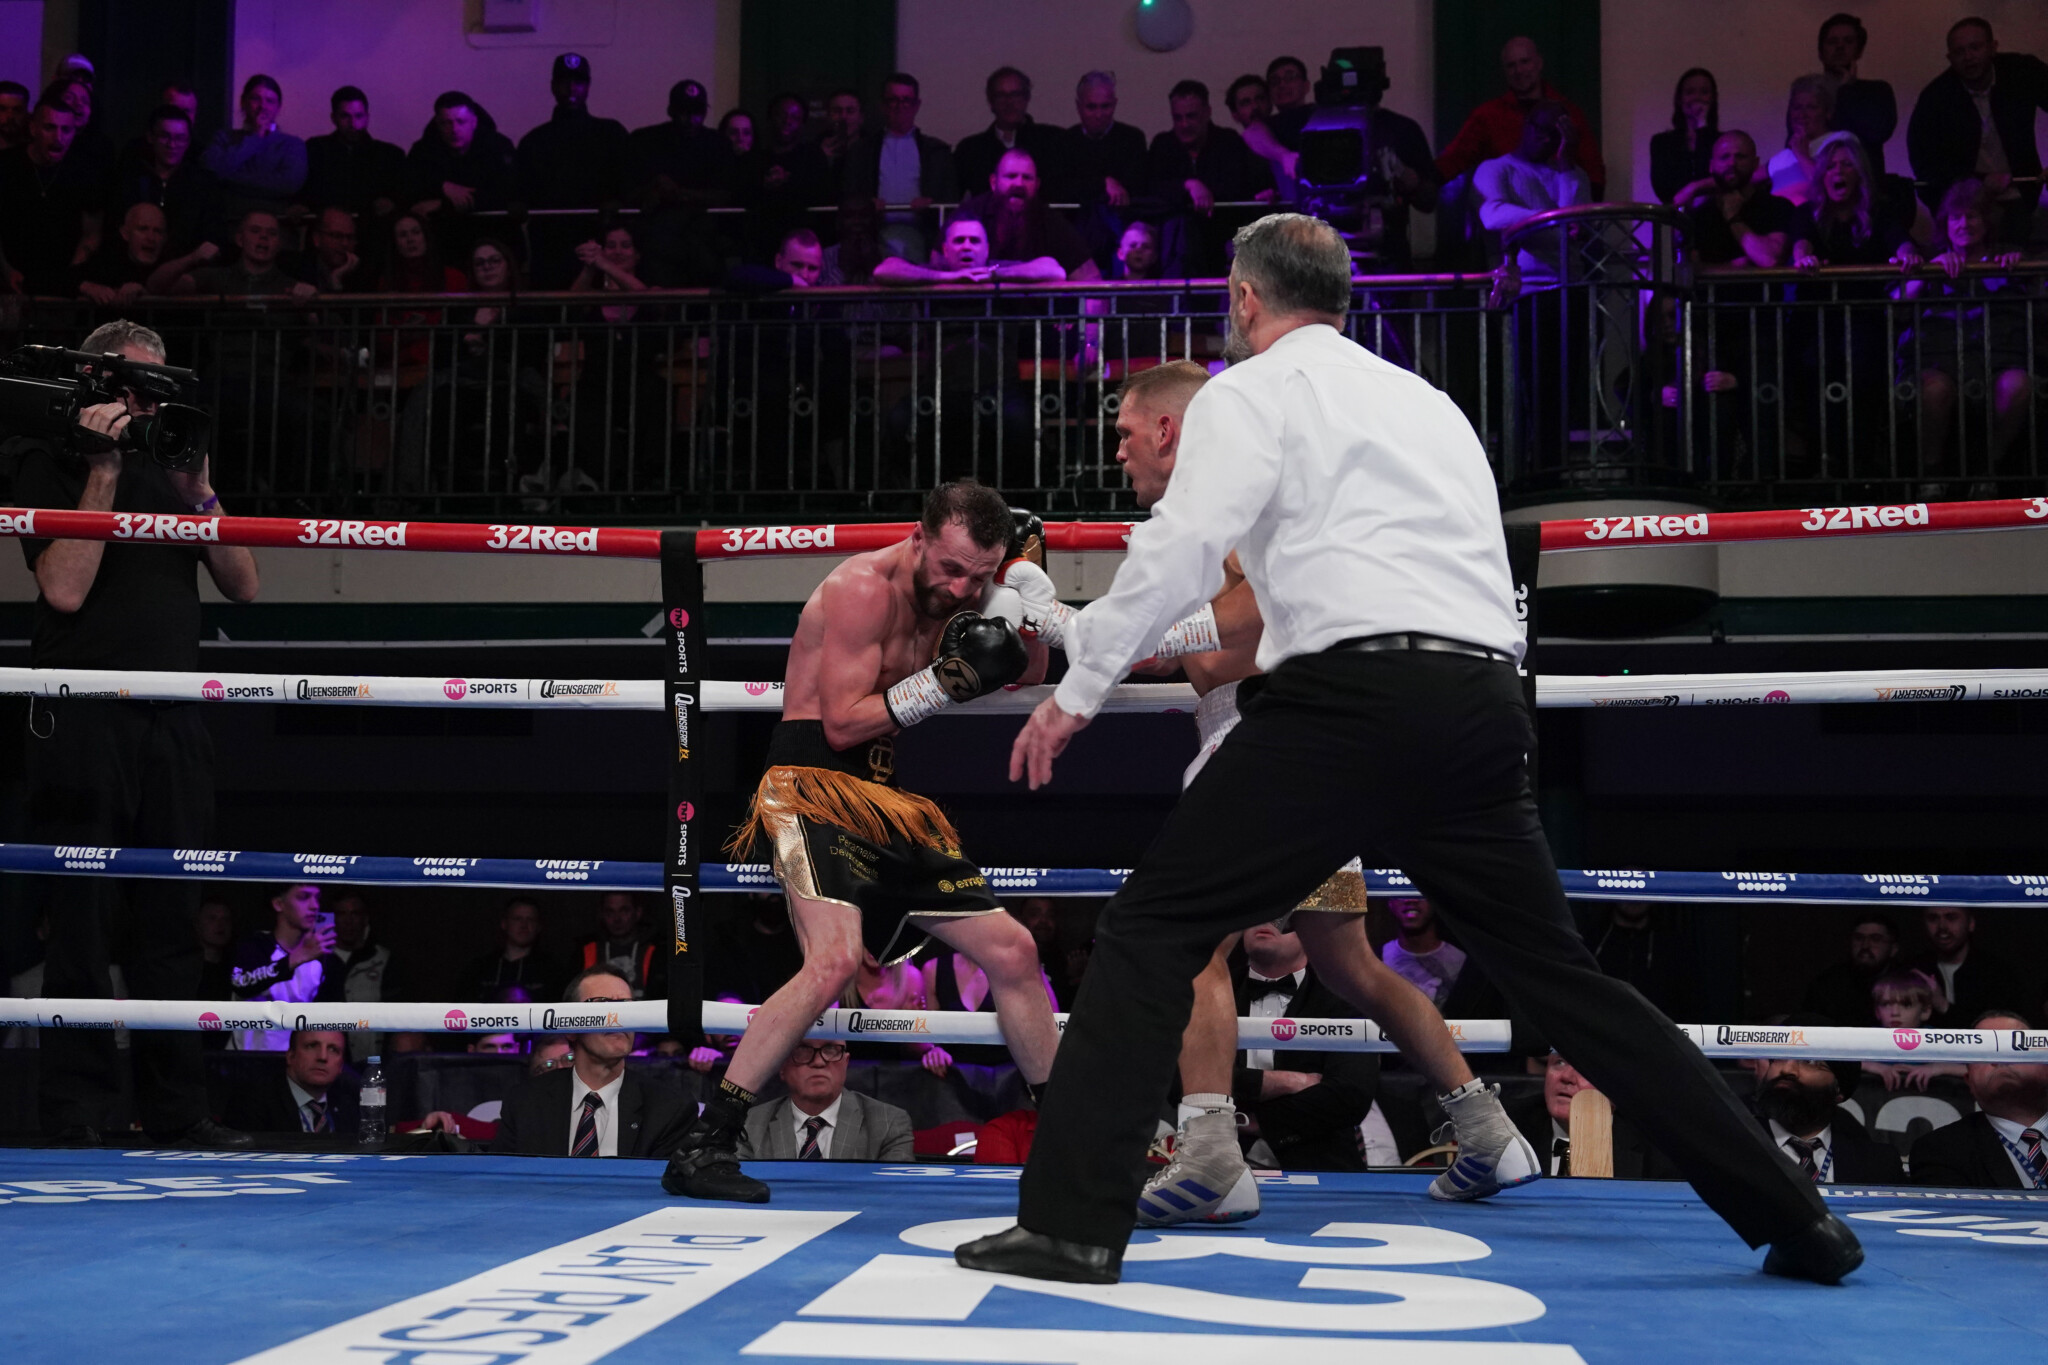 Streatham bantamweight Bourke loses tilt at British and Commonwealth titles - South London News